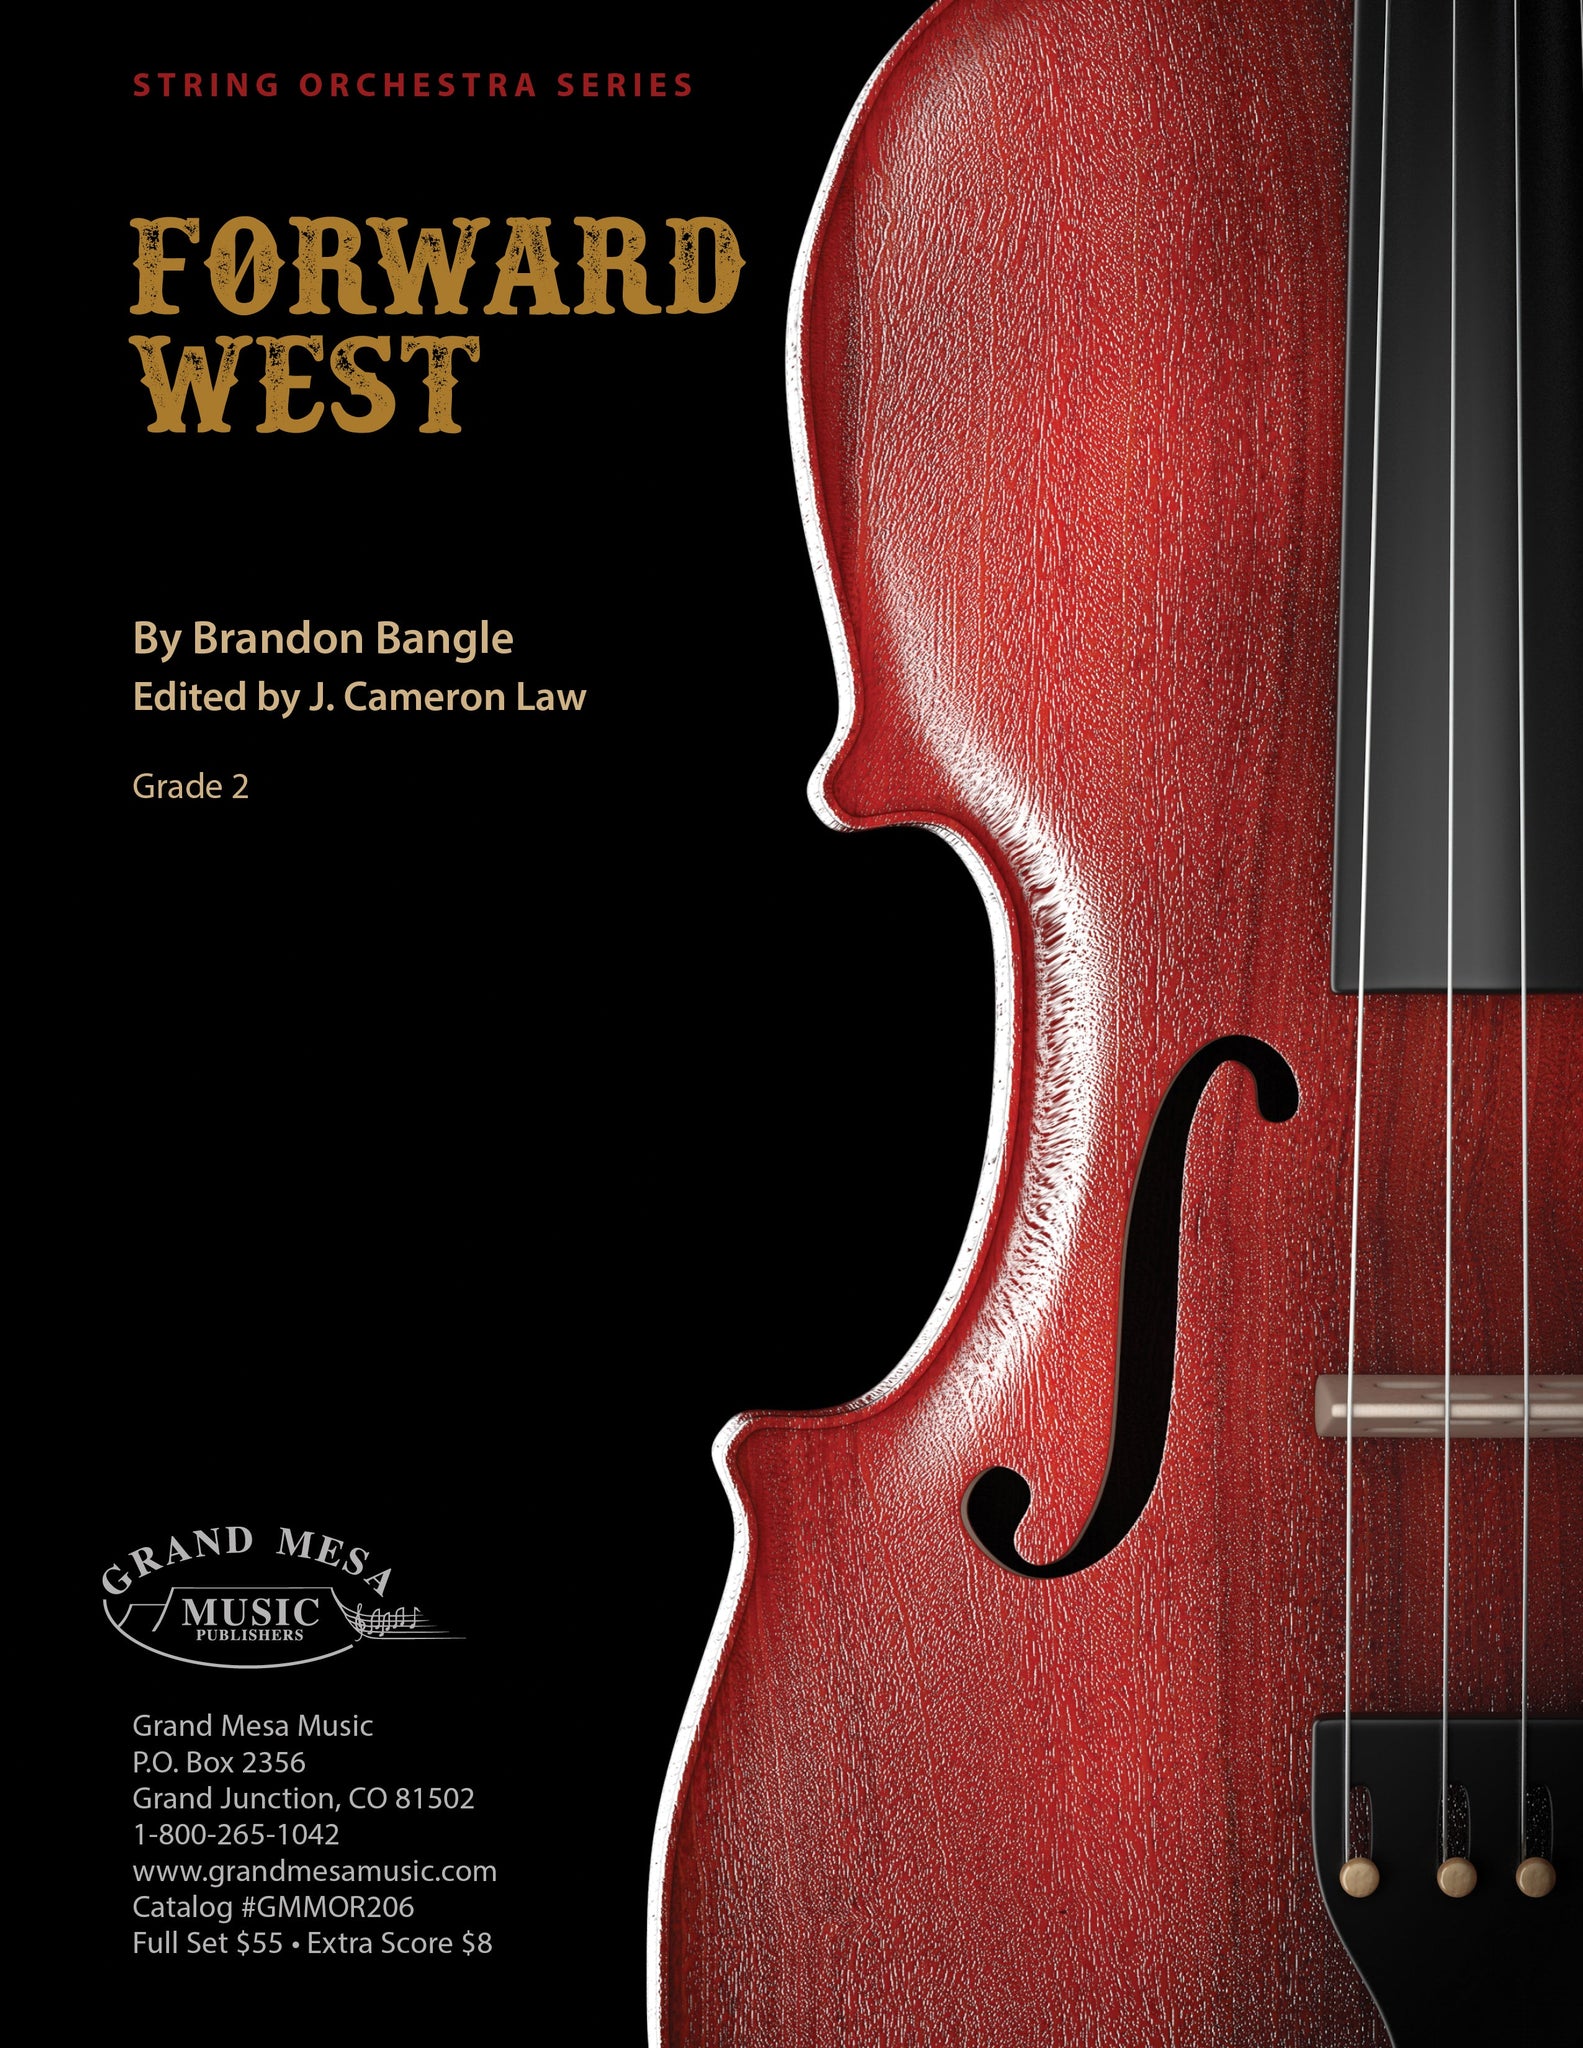 Strings sheet music cover of Forward West, composed by Brandon Bangle.